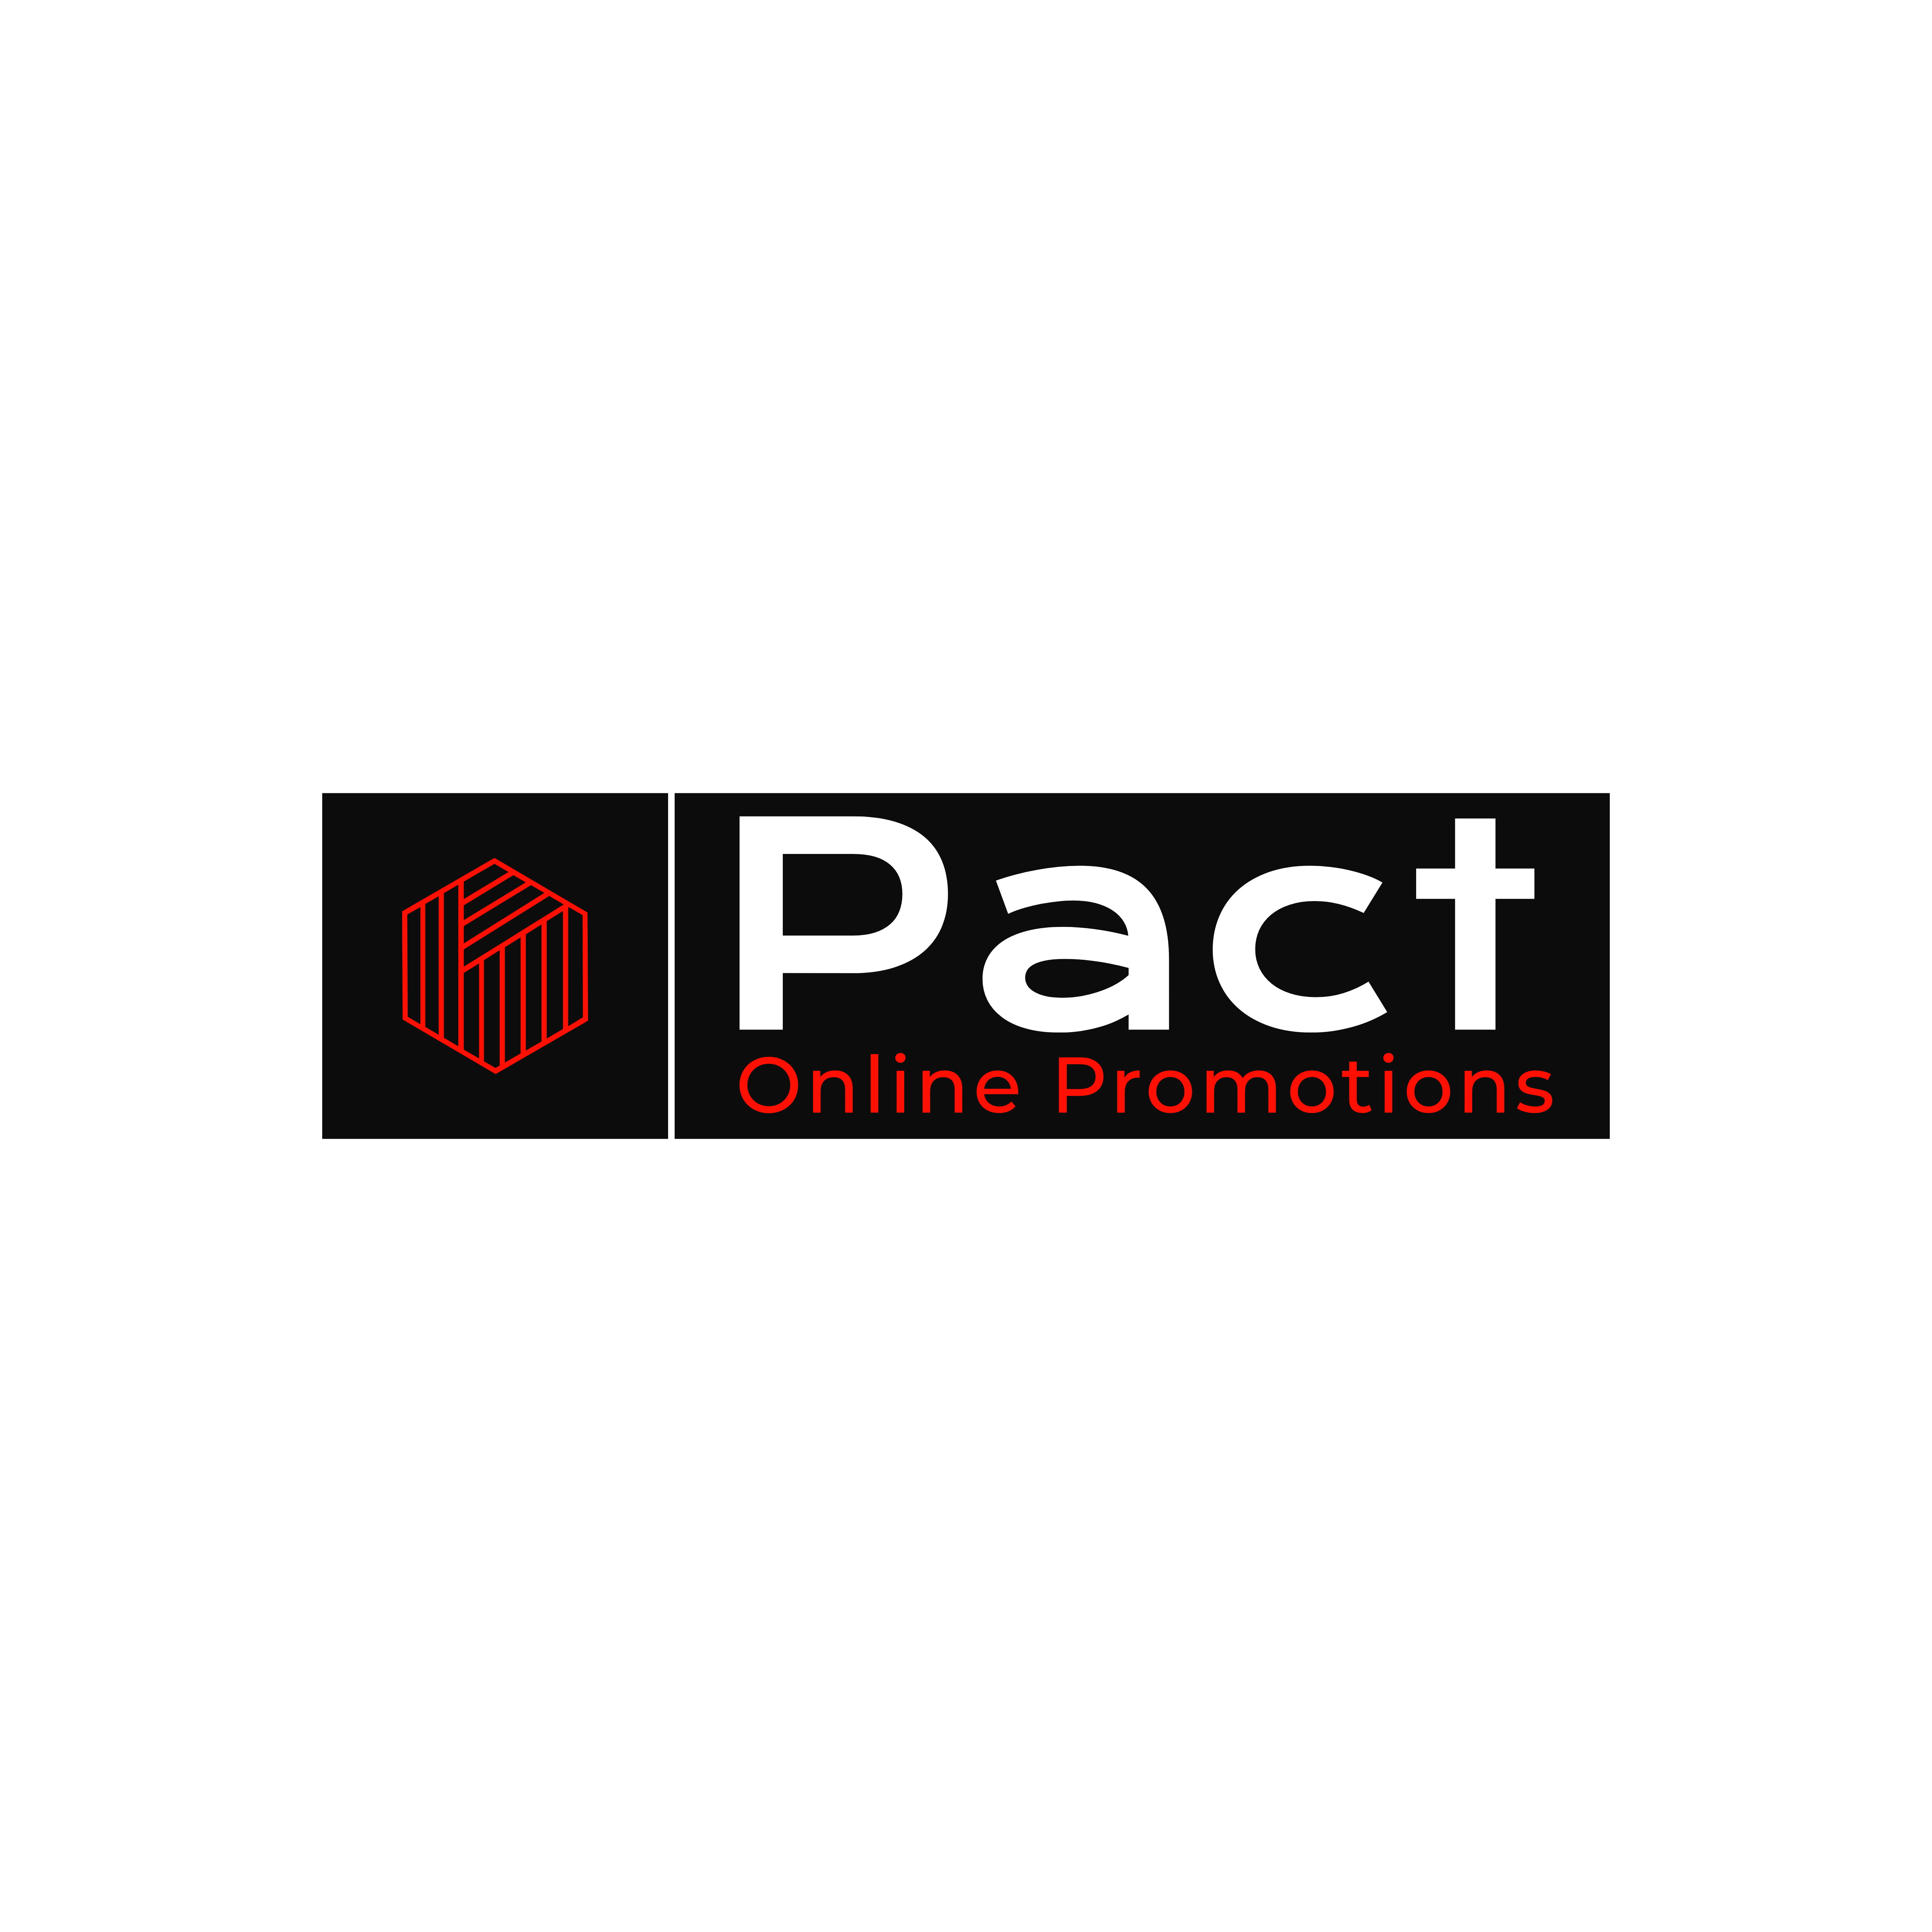 Pact Online Promotions Logo